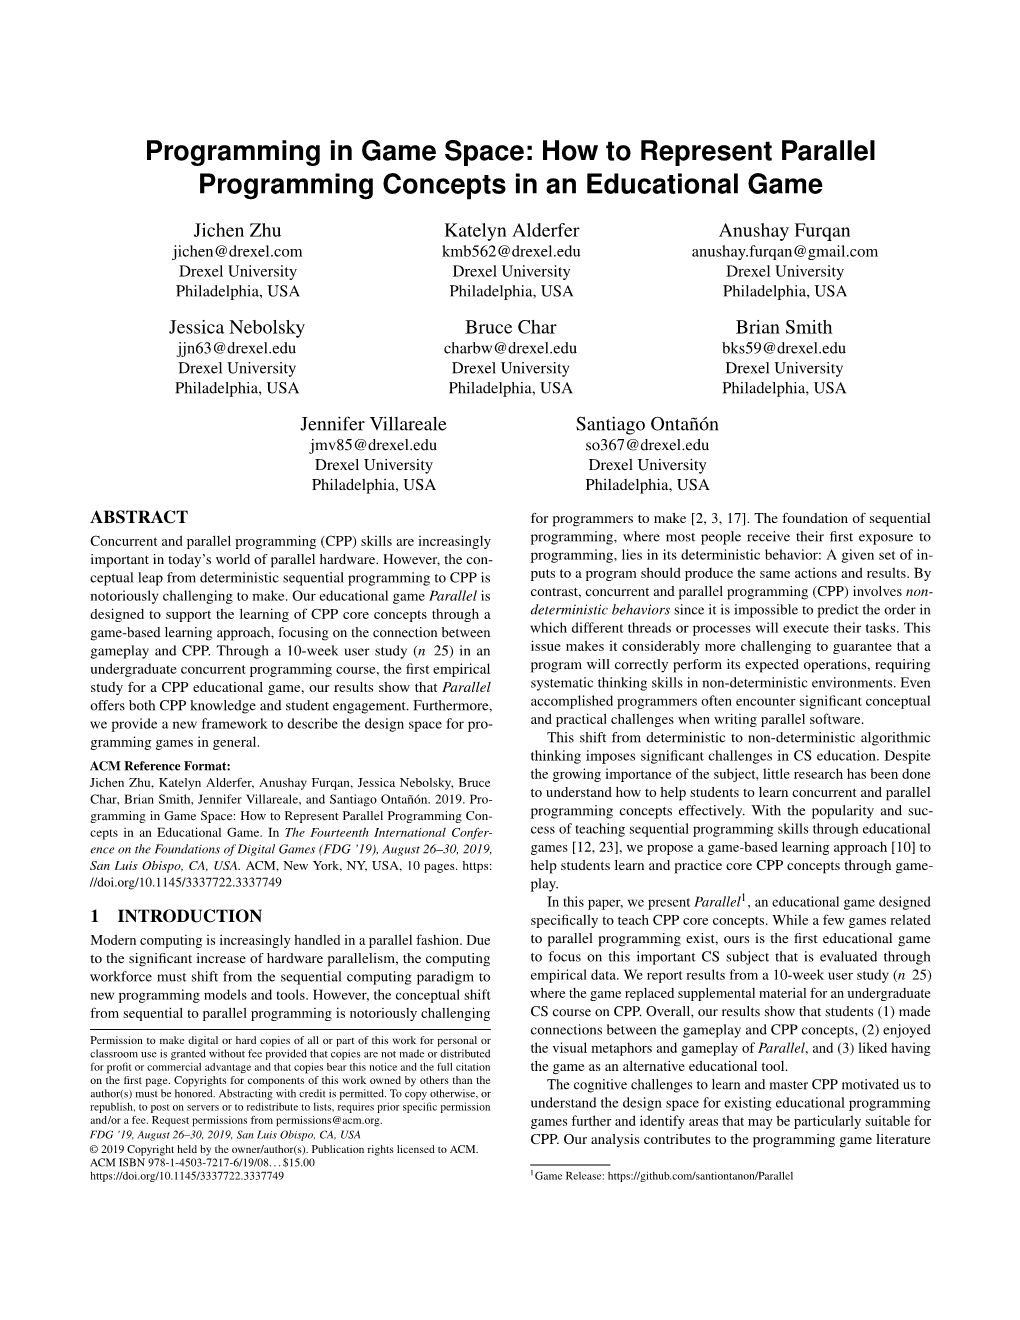 Programming in Game Space: How to Represent Parallel Programming Concepts in an Educational Game